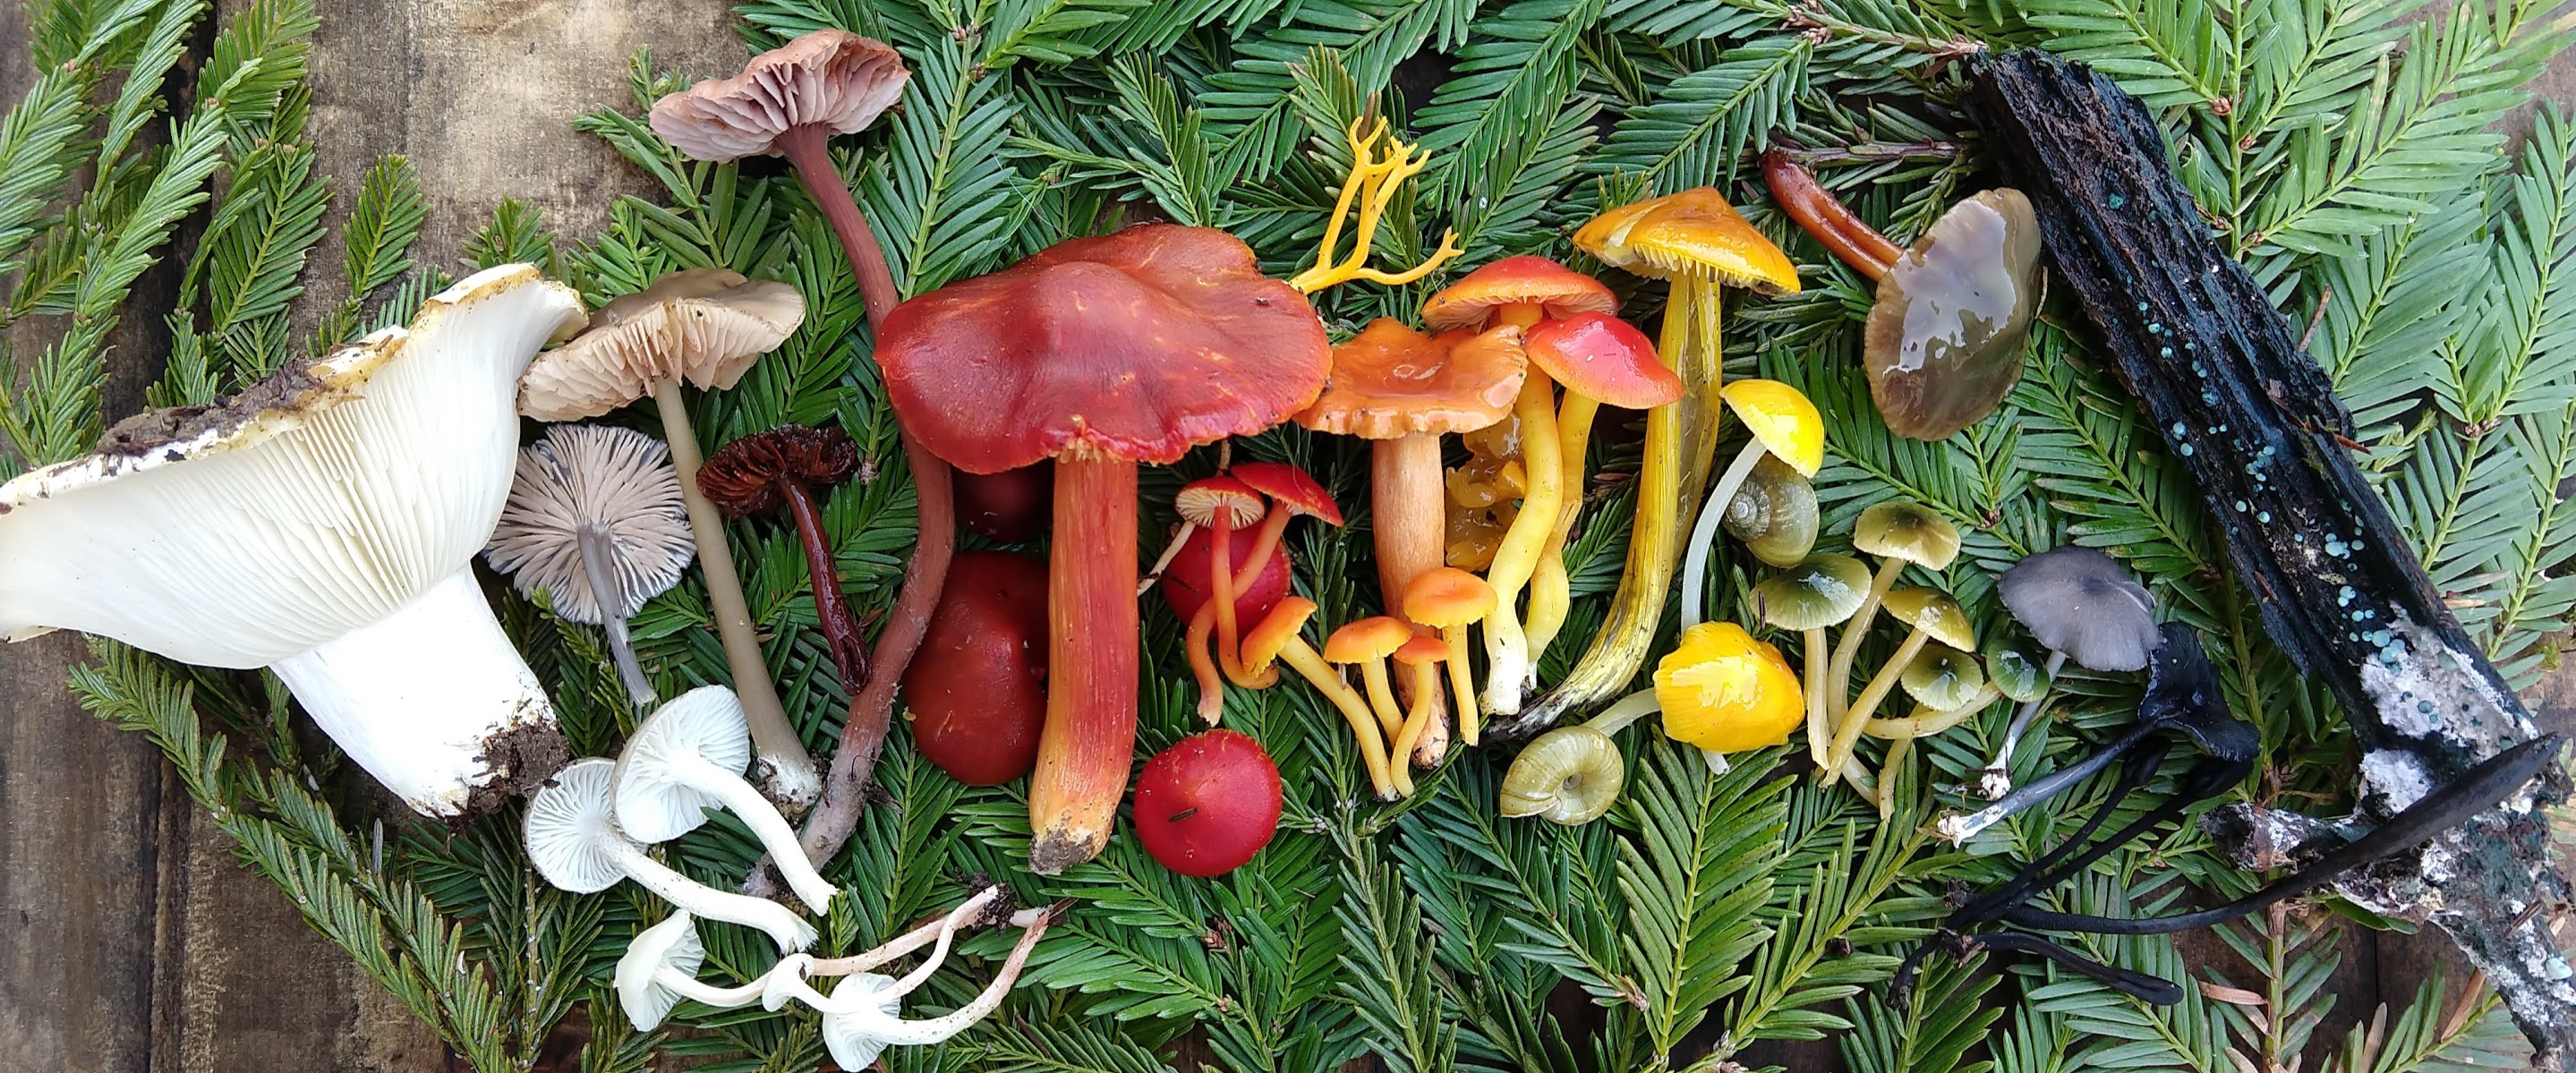 Mushrooms arranged by color in a rainbow, laid atop green redwood branches